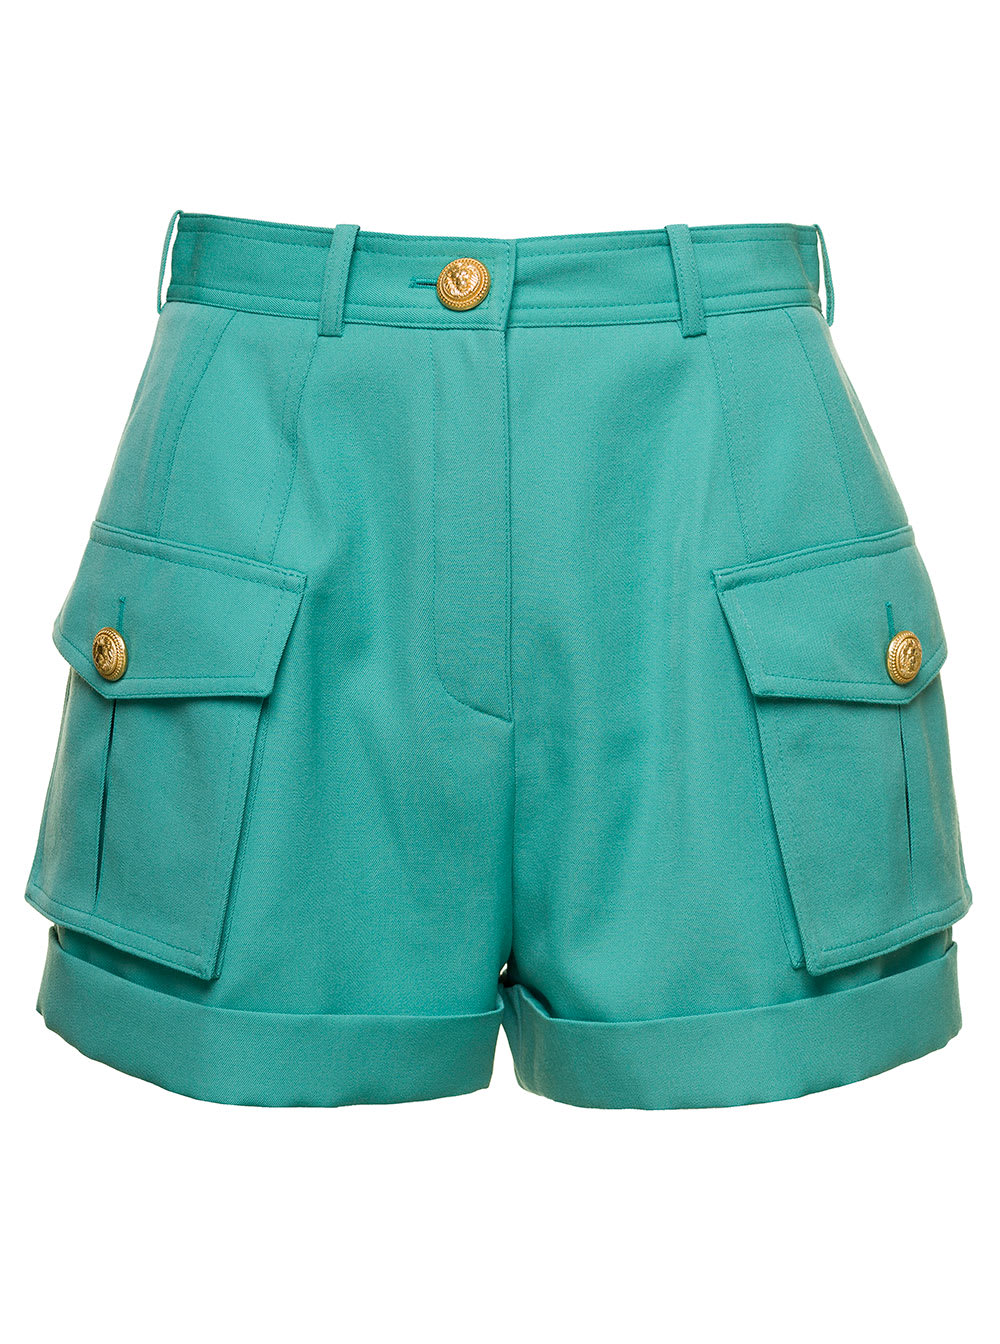 BALMAIN LIGHT BLUE SHORTS WITH CUFF AND JEWEL BUTTONS IN WOOL WOMAN